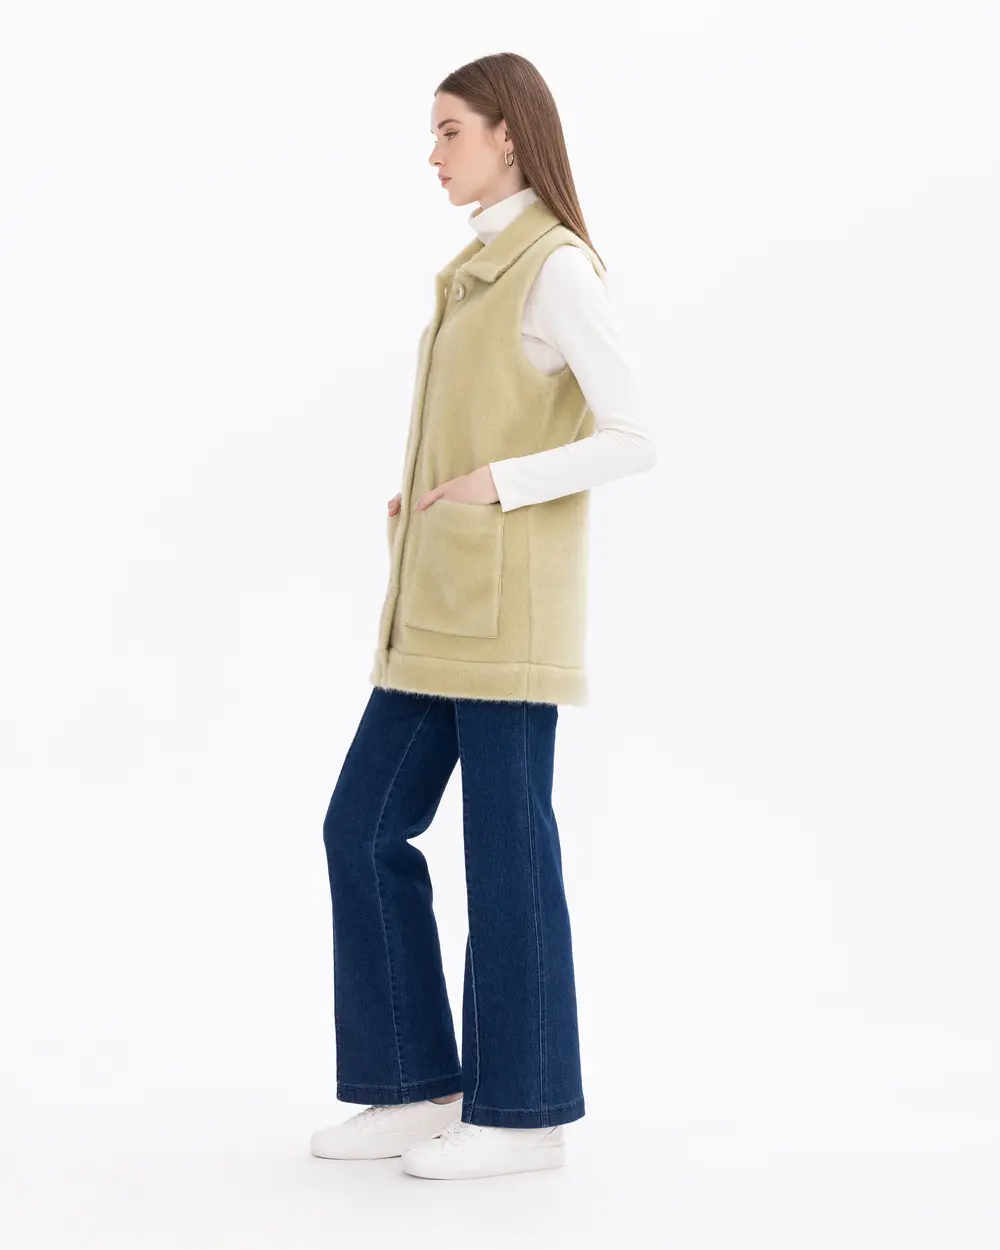 Buttoned Shirt Collar Vest with Pocket Detail